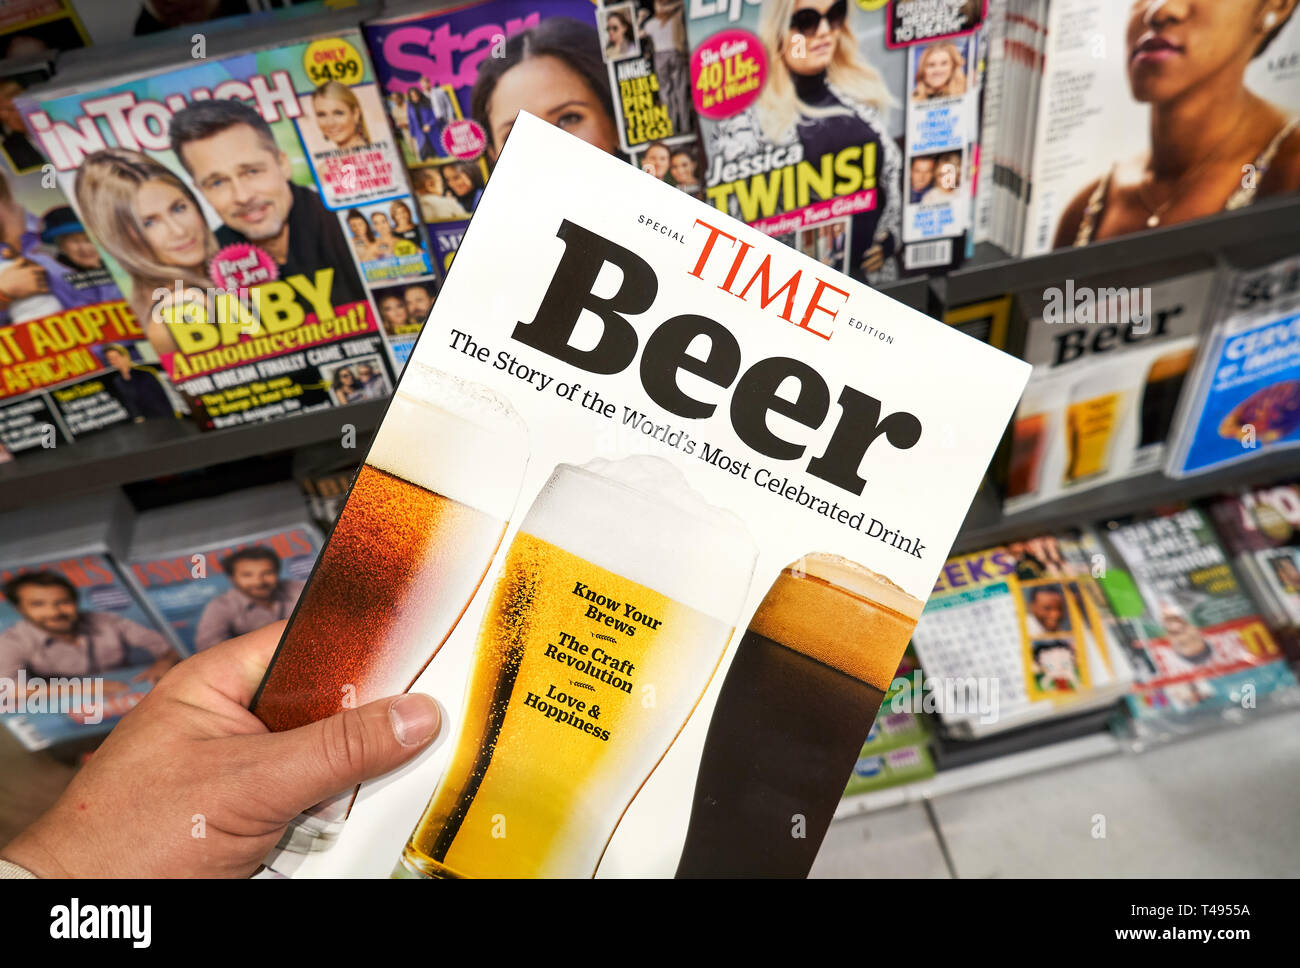 MONTREAL, CANADA - OCTOBER 9, 2018: Time magazine, special edition dedicated to Beer as the most celebrated drink in a hand over a stack of magazines. Stock Photo